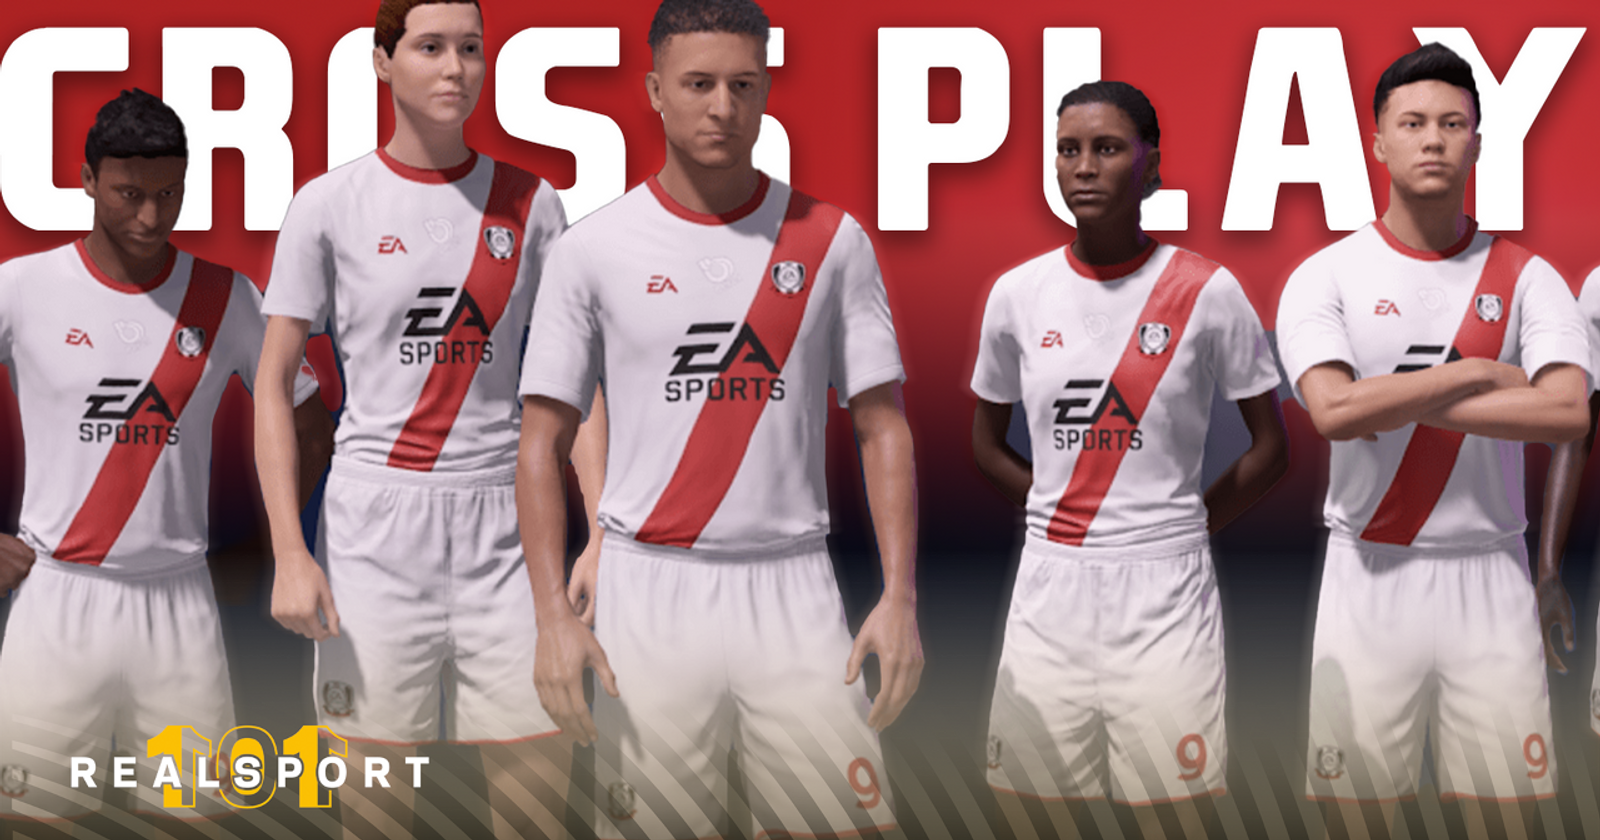 Pro Clubs about to hit different with crossplay in EA FC 24 #eafc24 #e